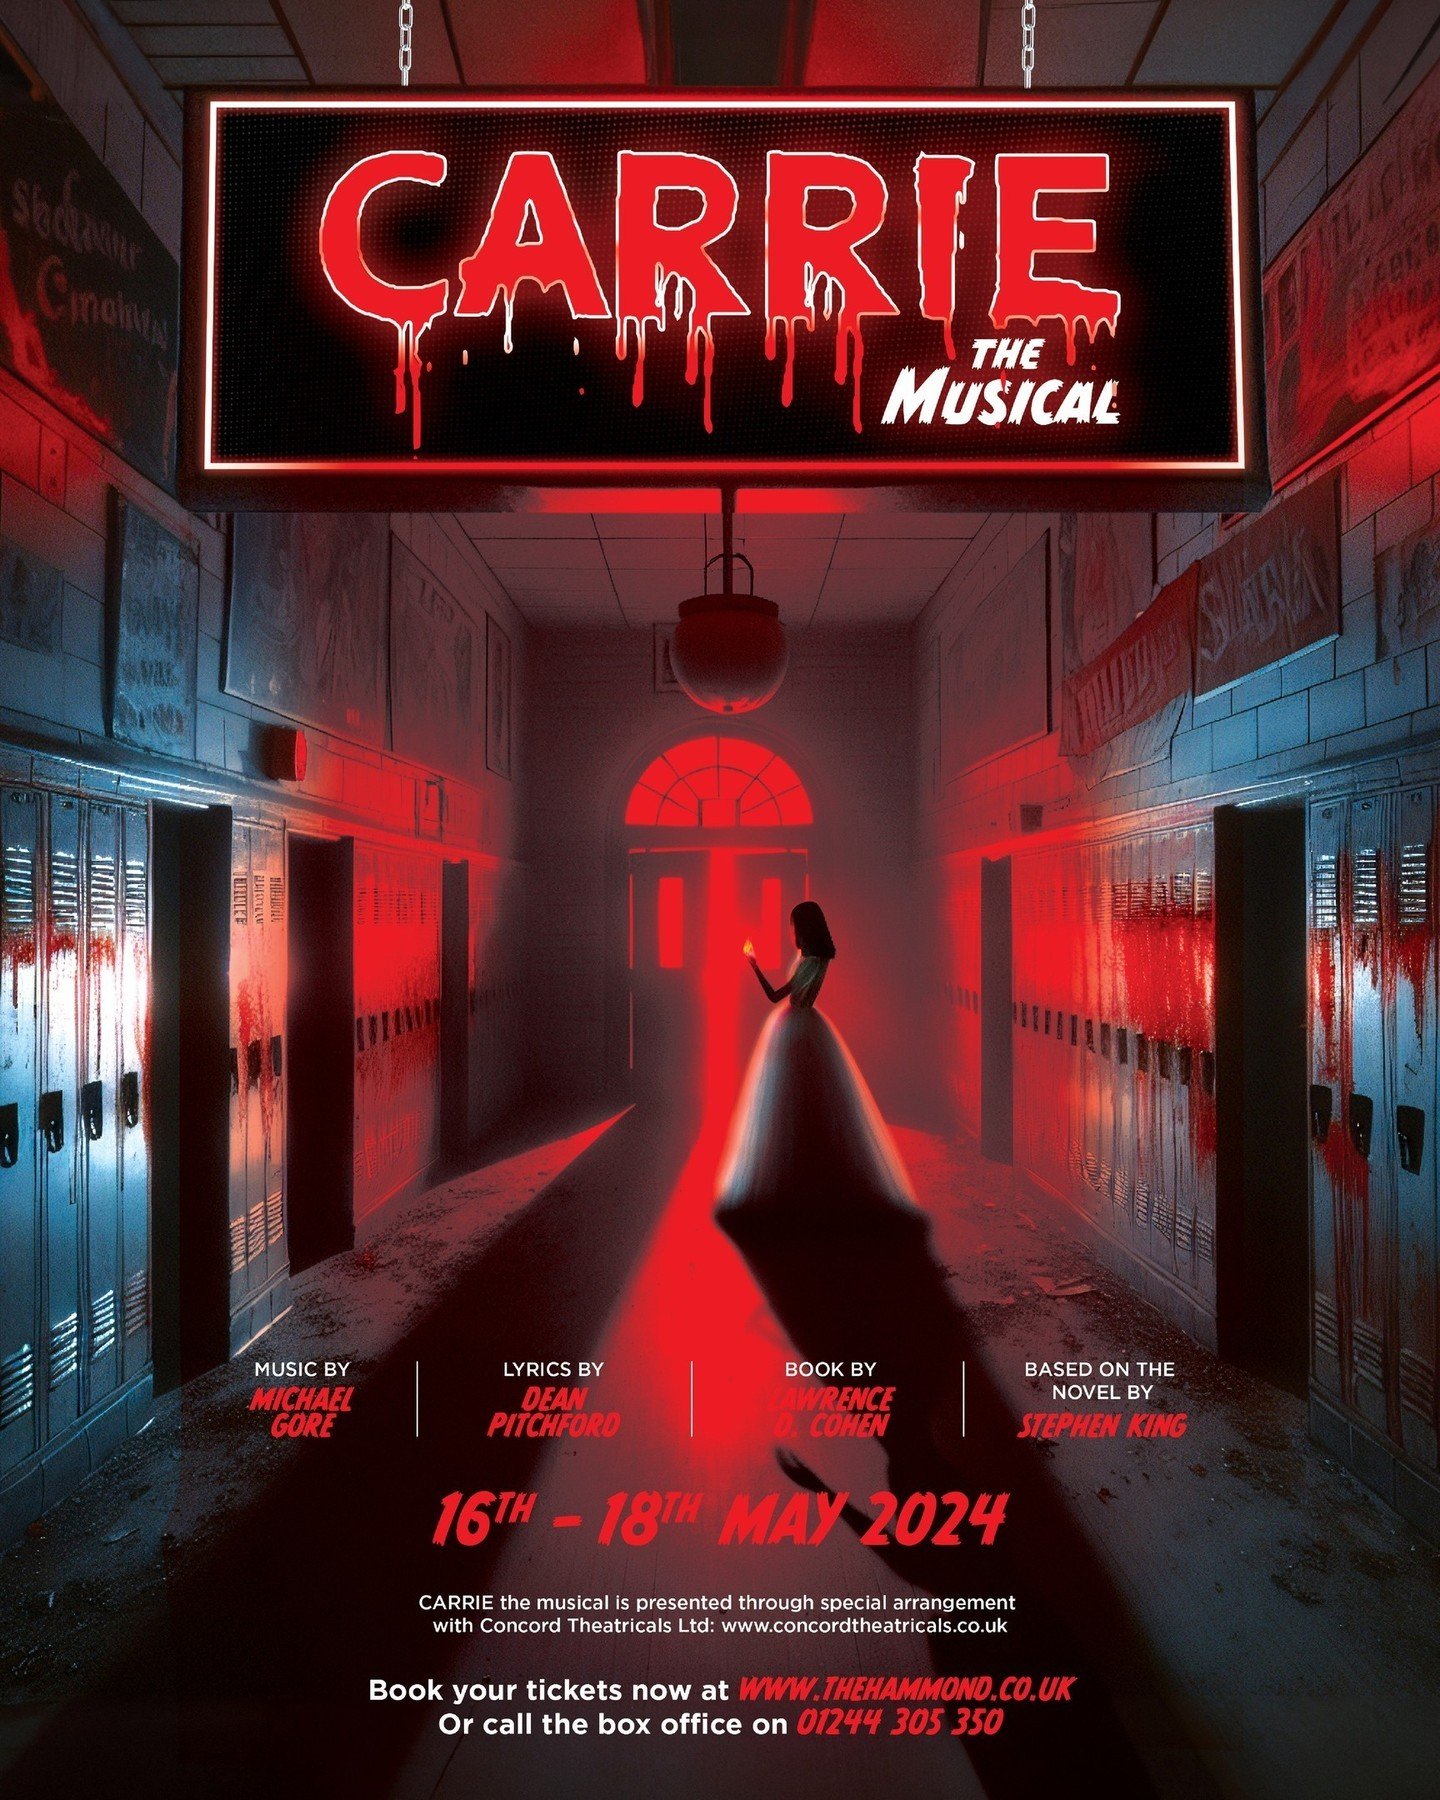 We have just released additional tickets to this week's performances of CARRIE THE MUSICAL. They're selling fast! To avoid disappointment, book your tickets ASAP:⁠
⁠
www.thehammond.co.uk/whats-on